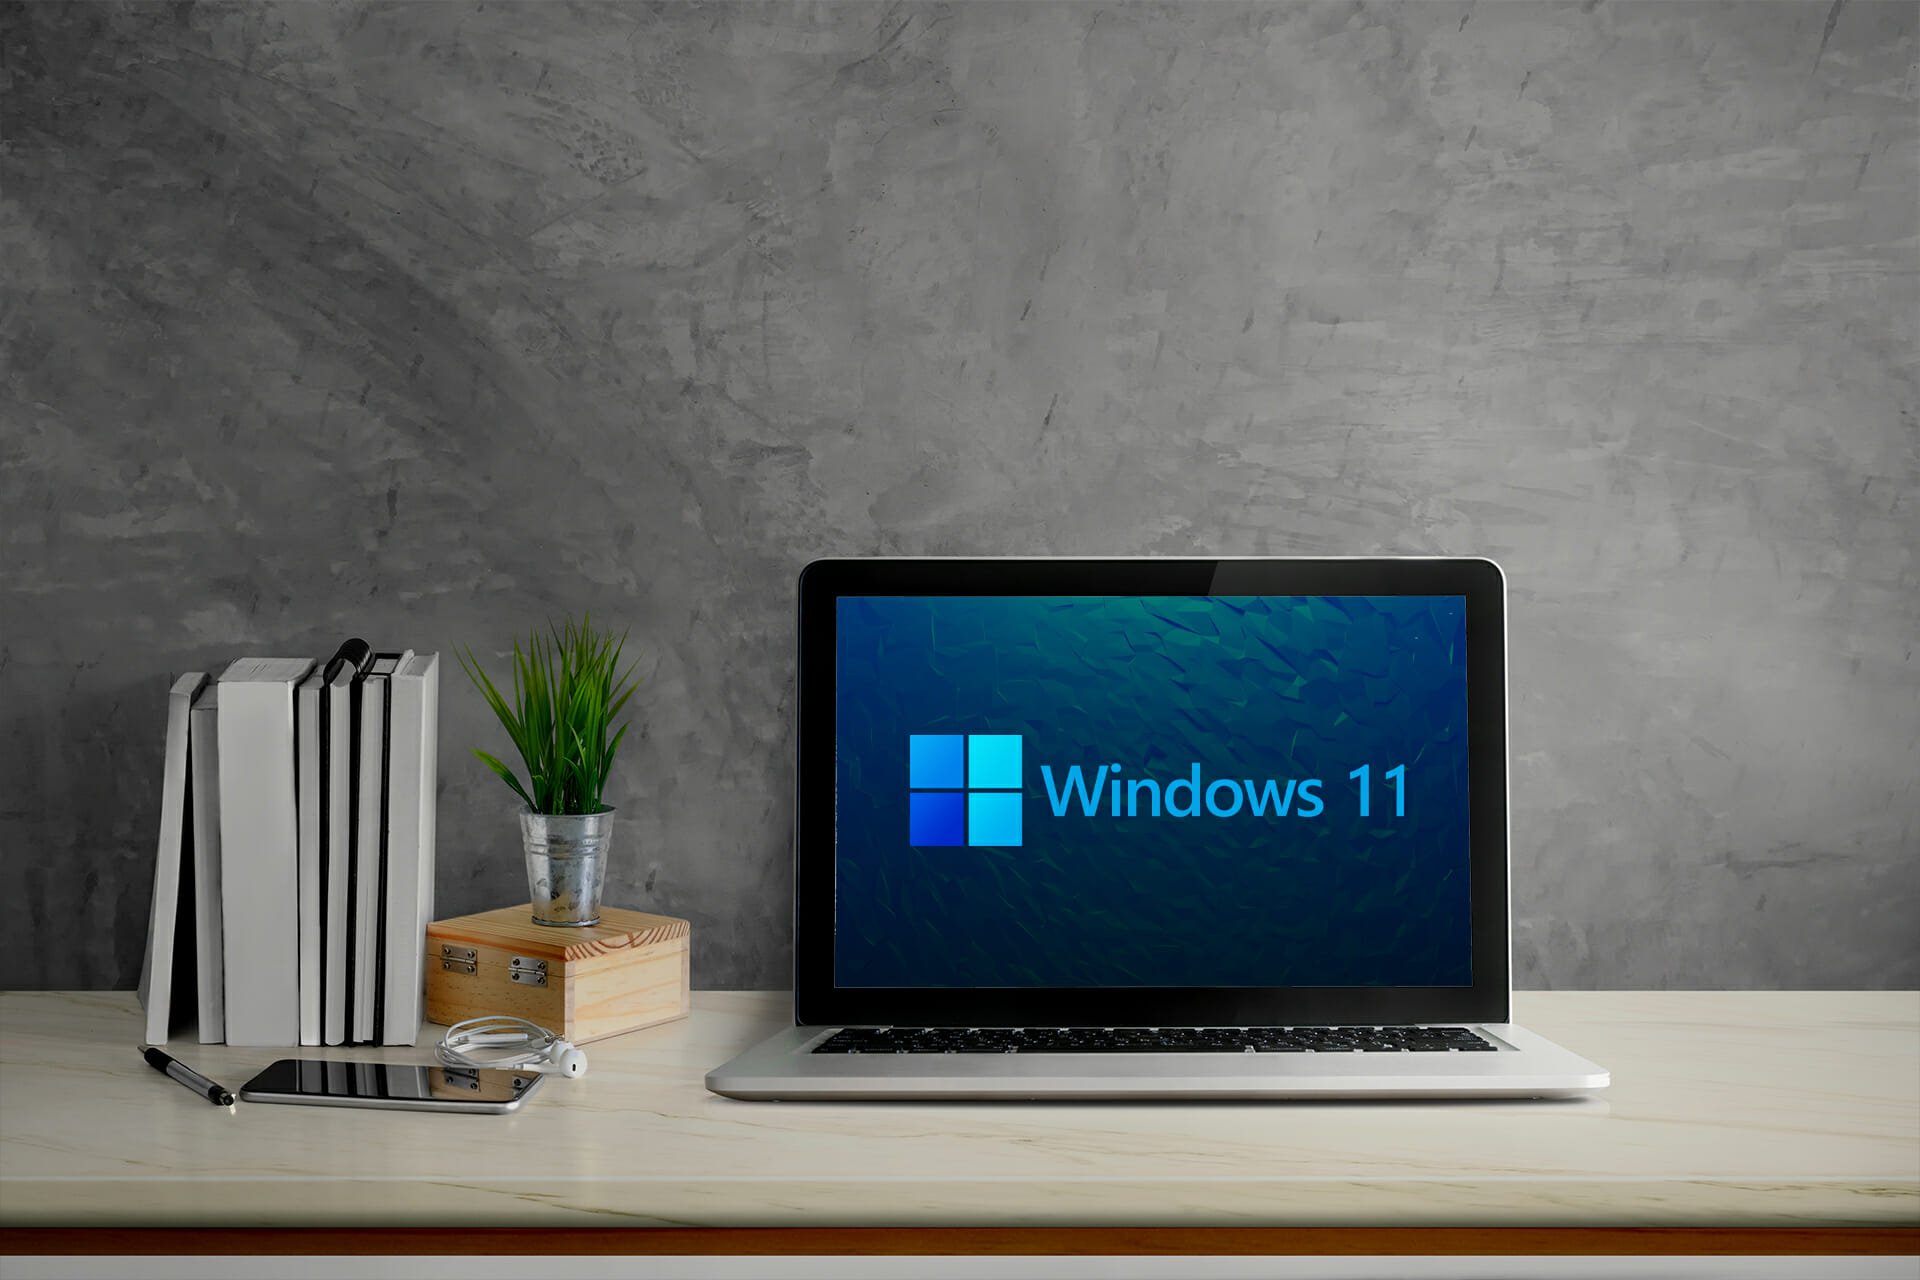 Windows 11 specifications and requirements